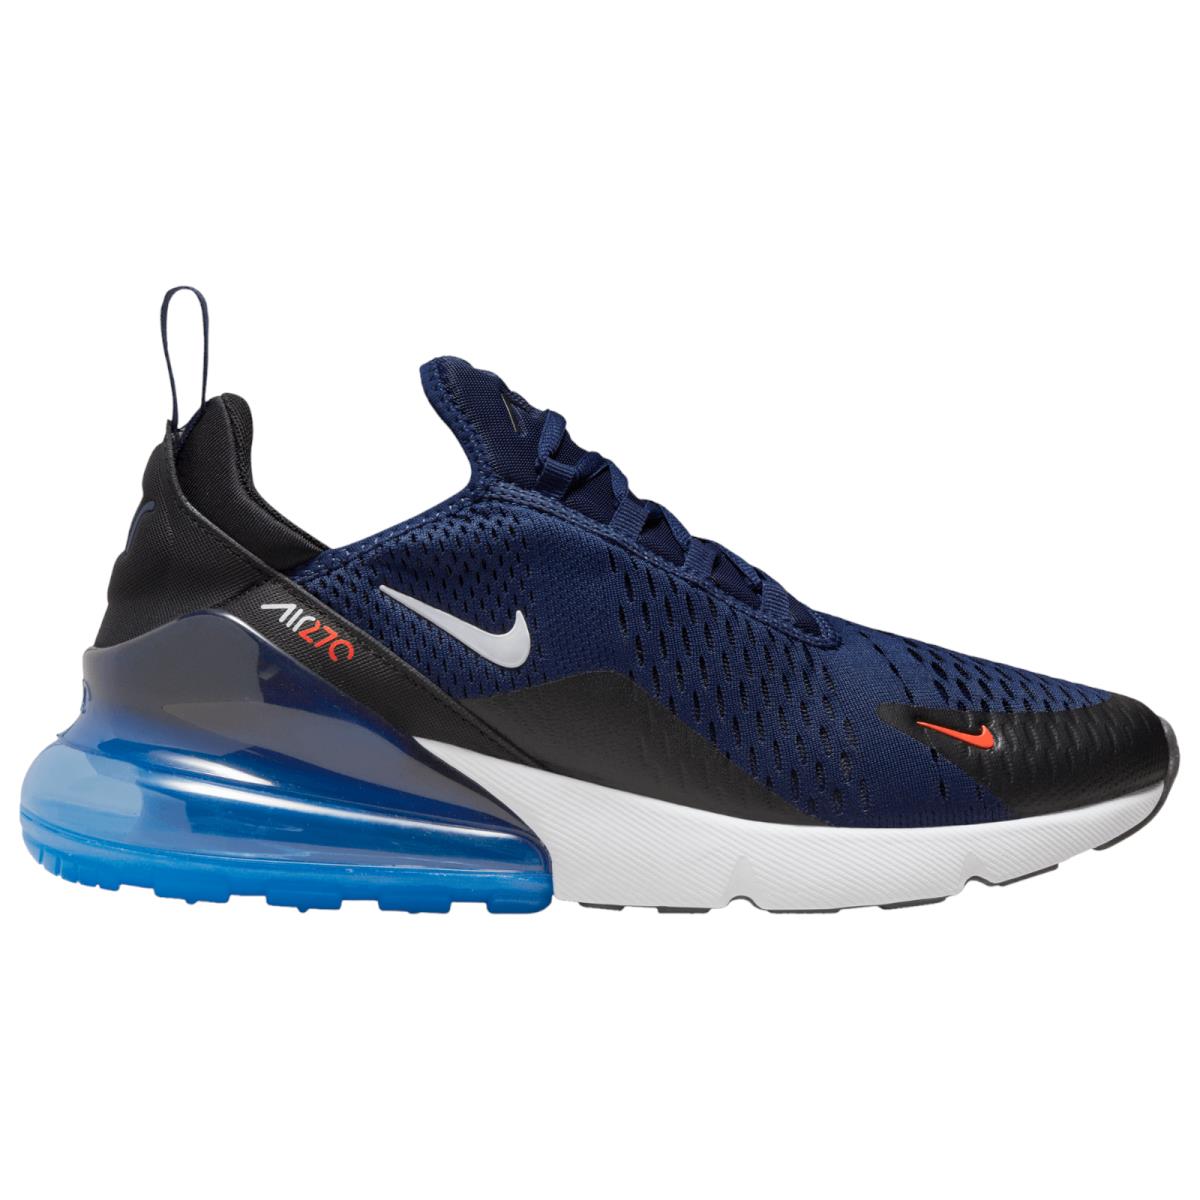 Nike Air Max 270 Men`s Casual Shoes All Colors US Sizes 7-14 Midnight Navy/White/Bright Crimson/Black